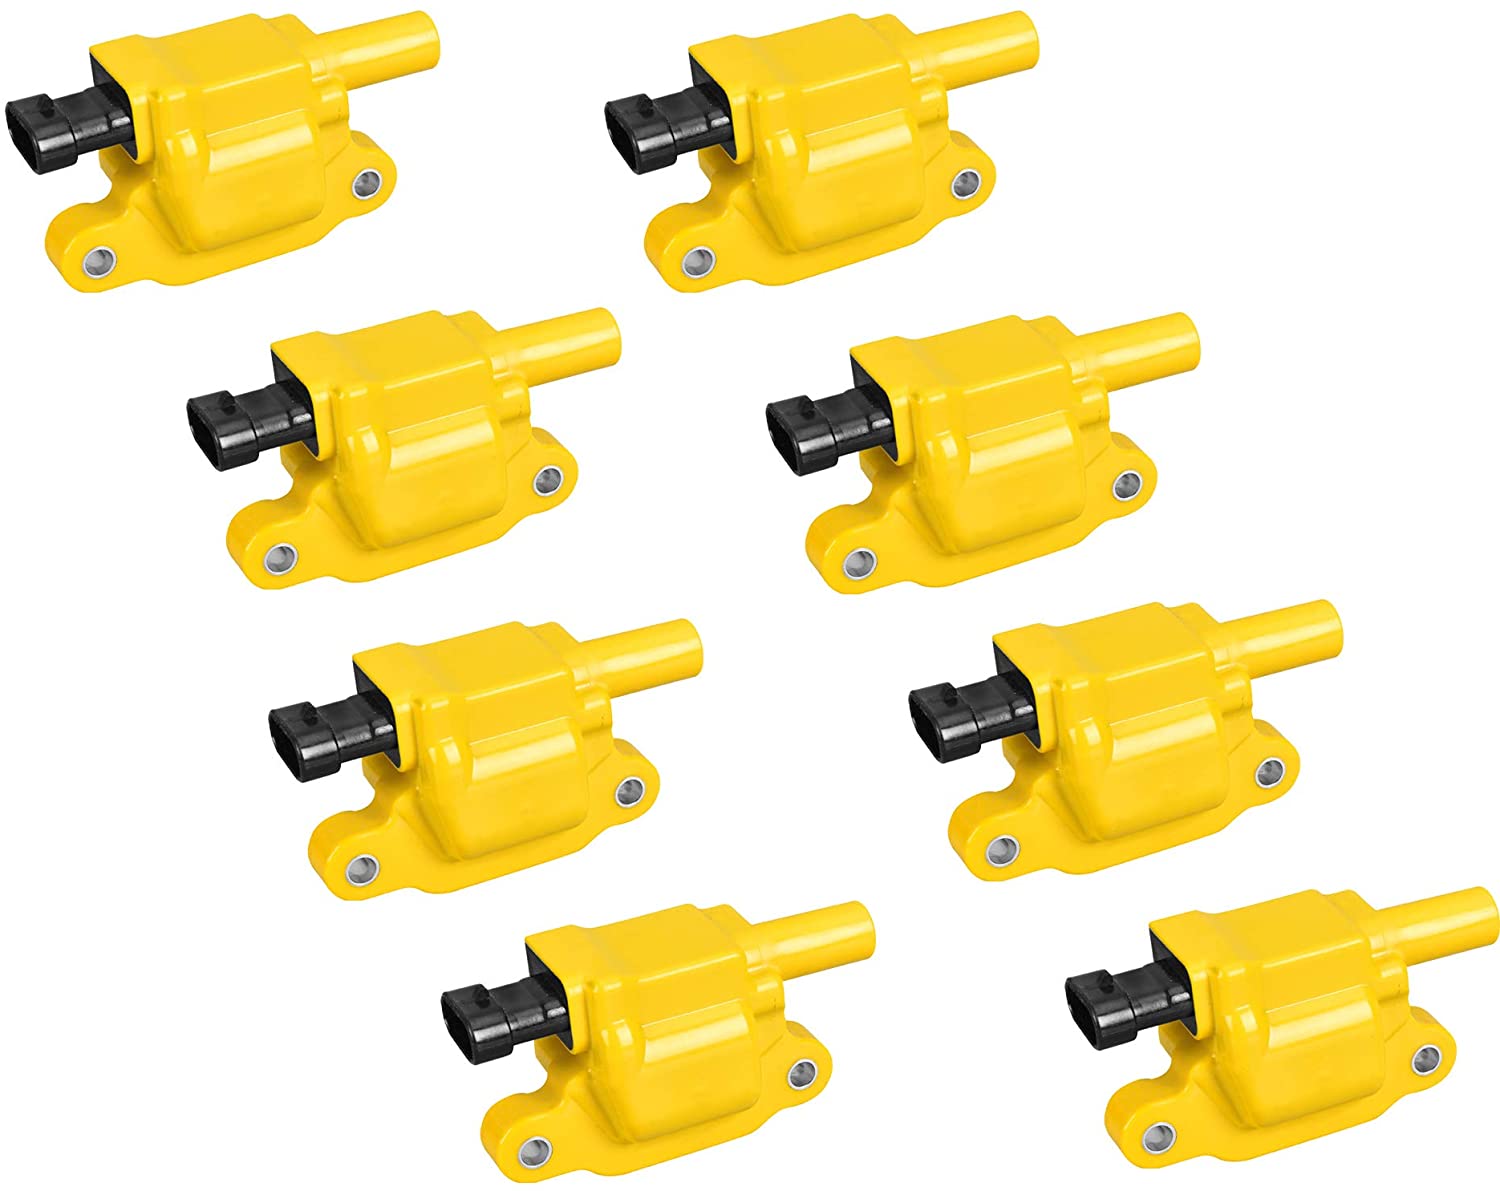 ENA Heavy Duty Ignition Coil Set of 8 Compatible with 2006-2009 Chevrolet Impala 2007-2013 Tahoe and 2008-2013 Suburban 1500 2500 (8)